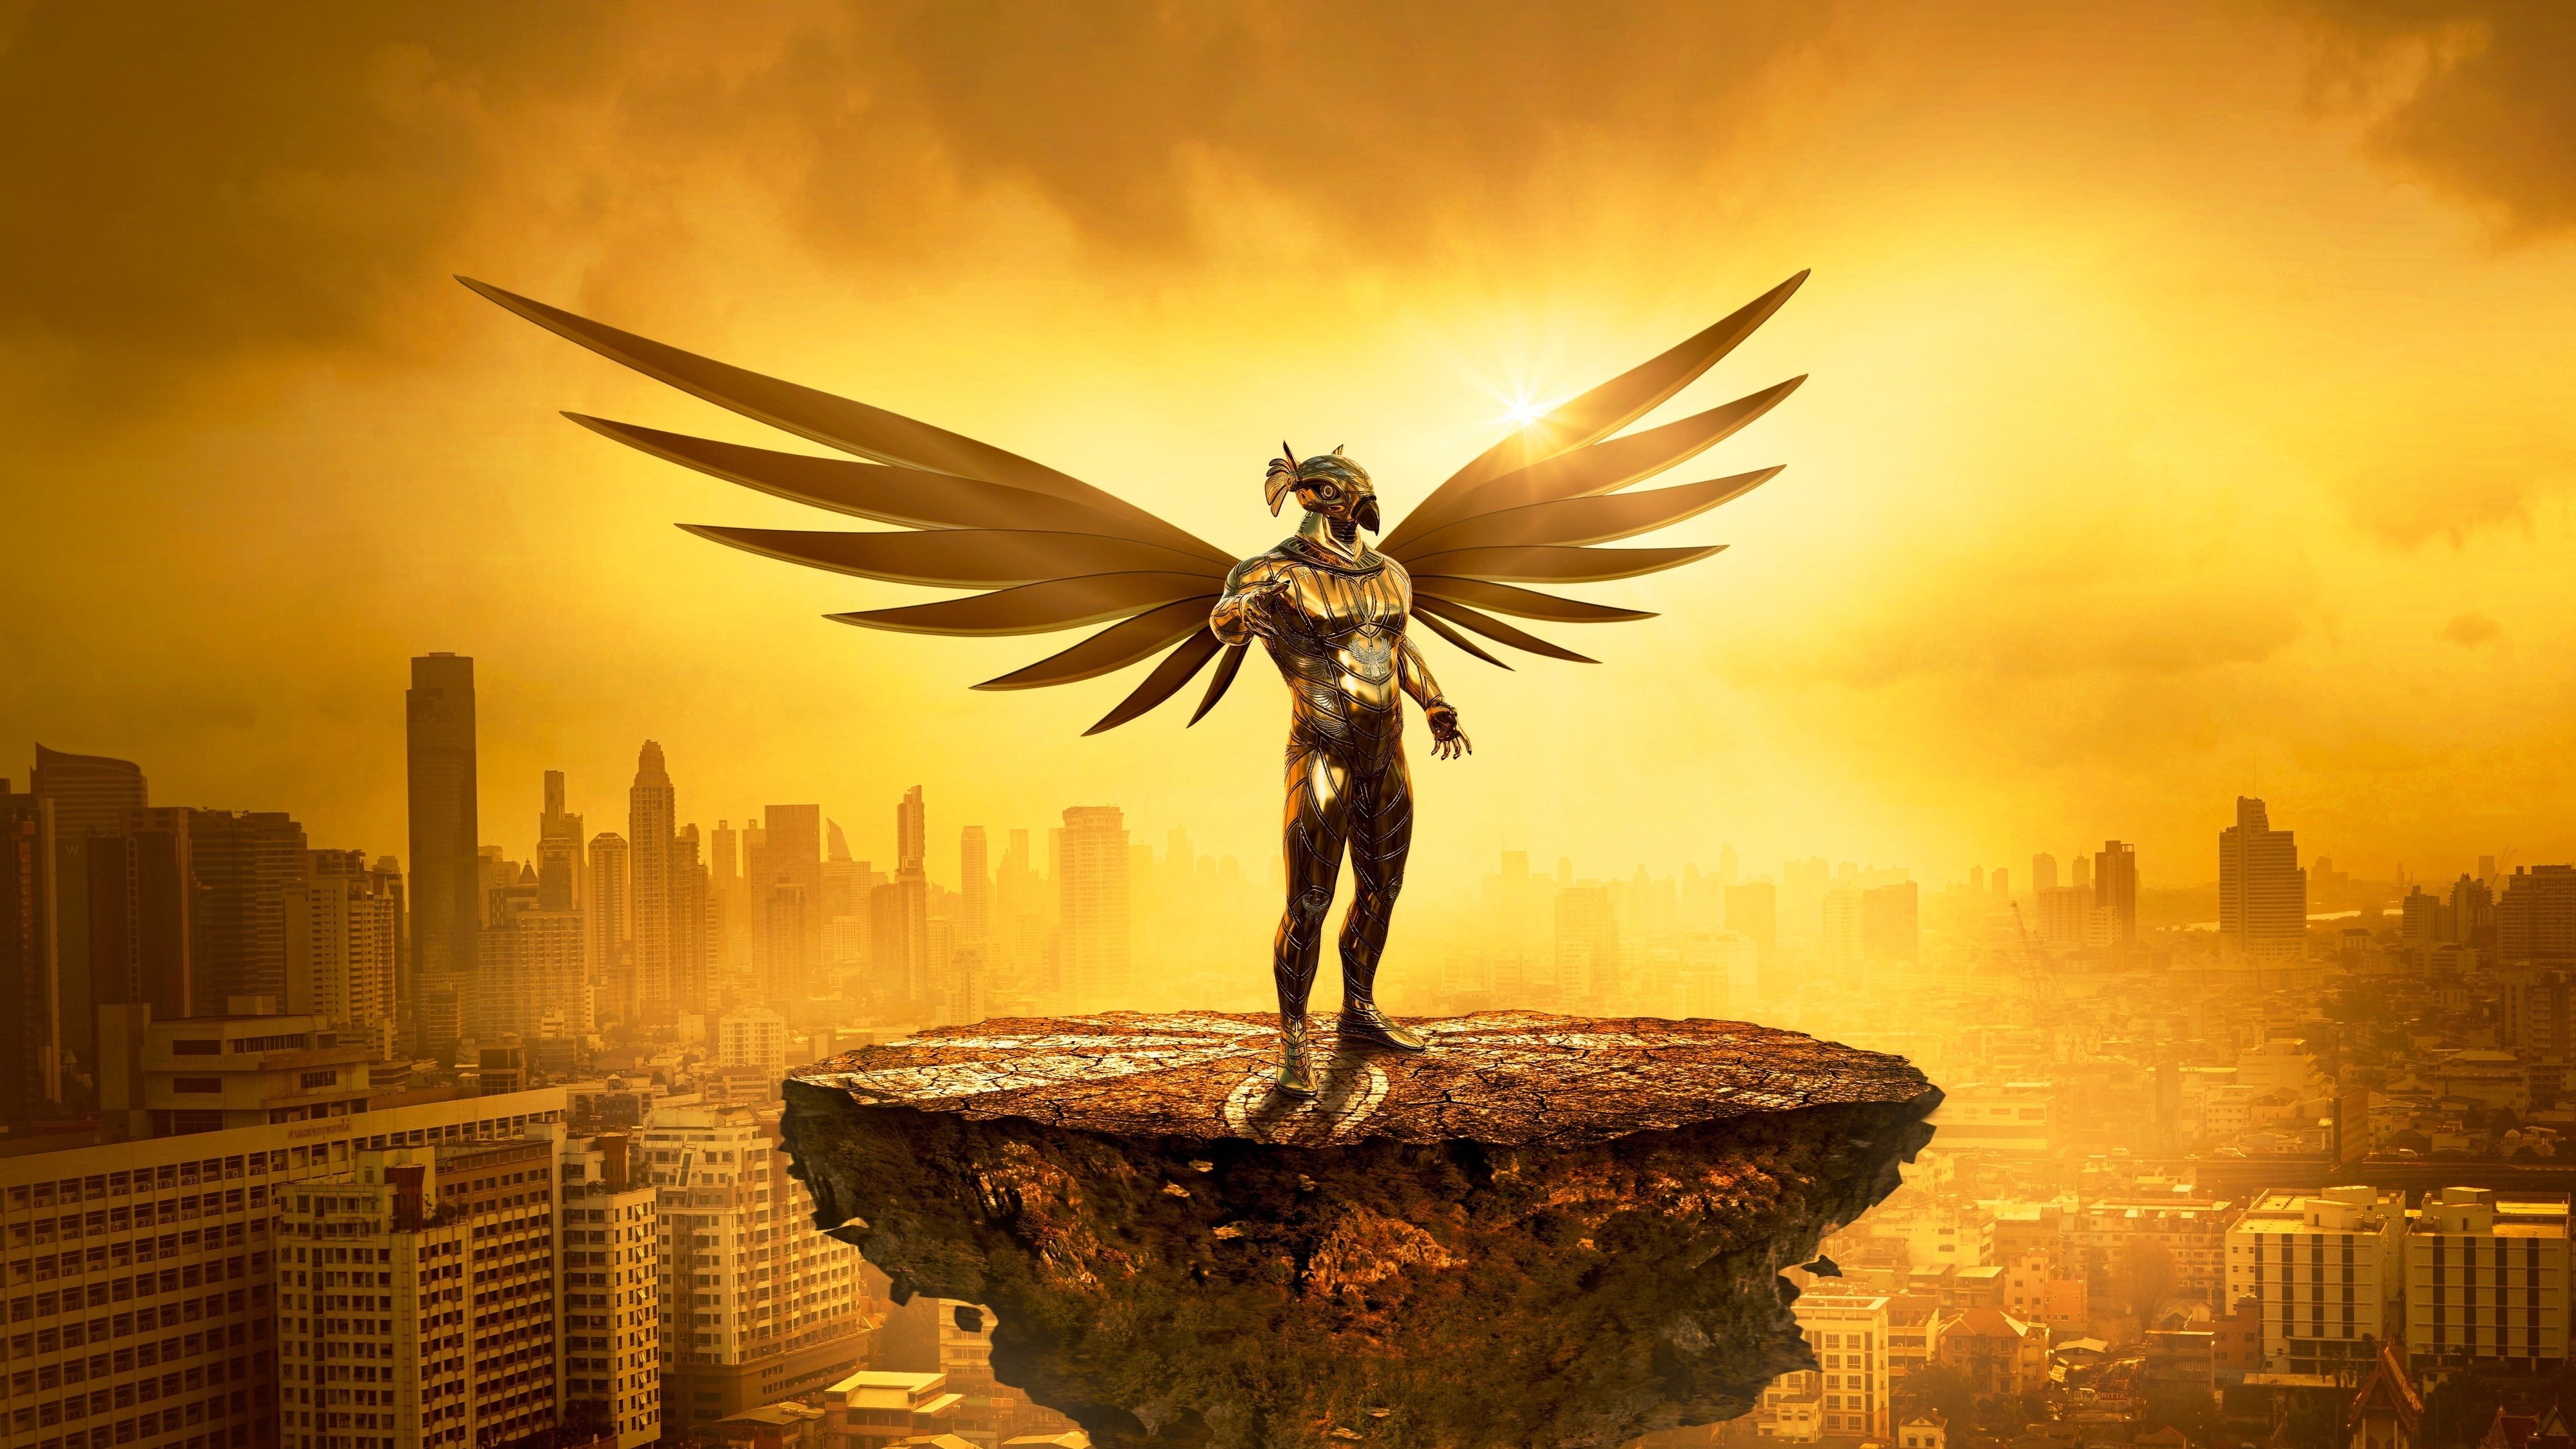 Angel 4K wallpaper for your desktop or mobile screen free and easy to download